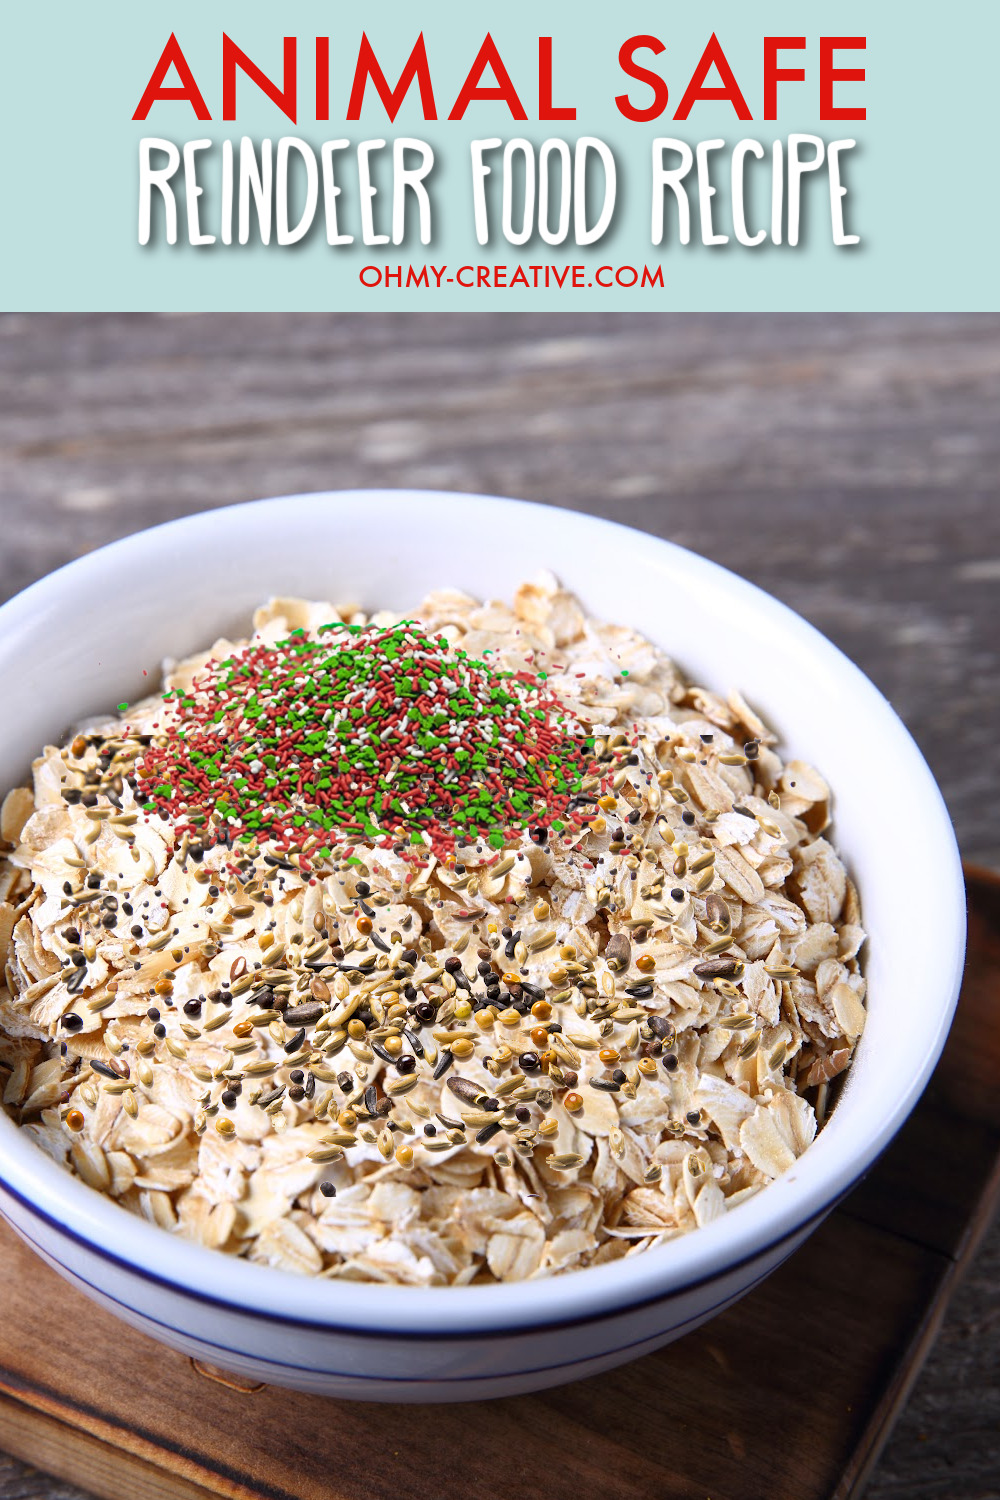 This reindeer food recipe is simple to make and will keep the animals happy and healthy during the holiday season. This bowl included oats, edible glitter, Christmas sprinkles and birdseed.